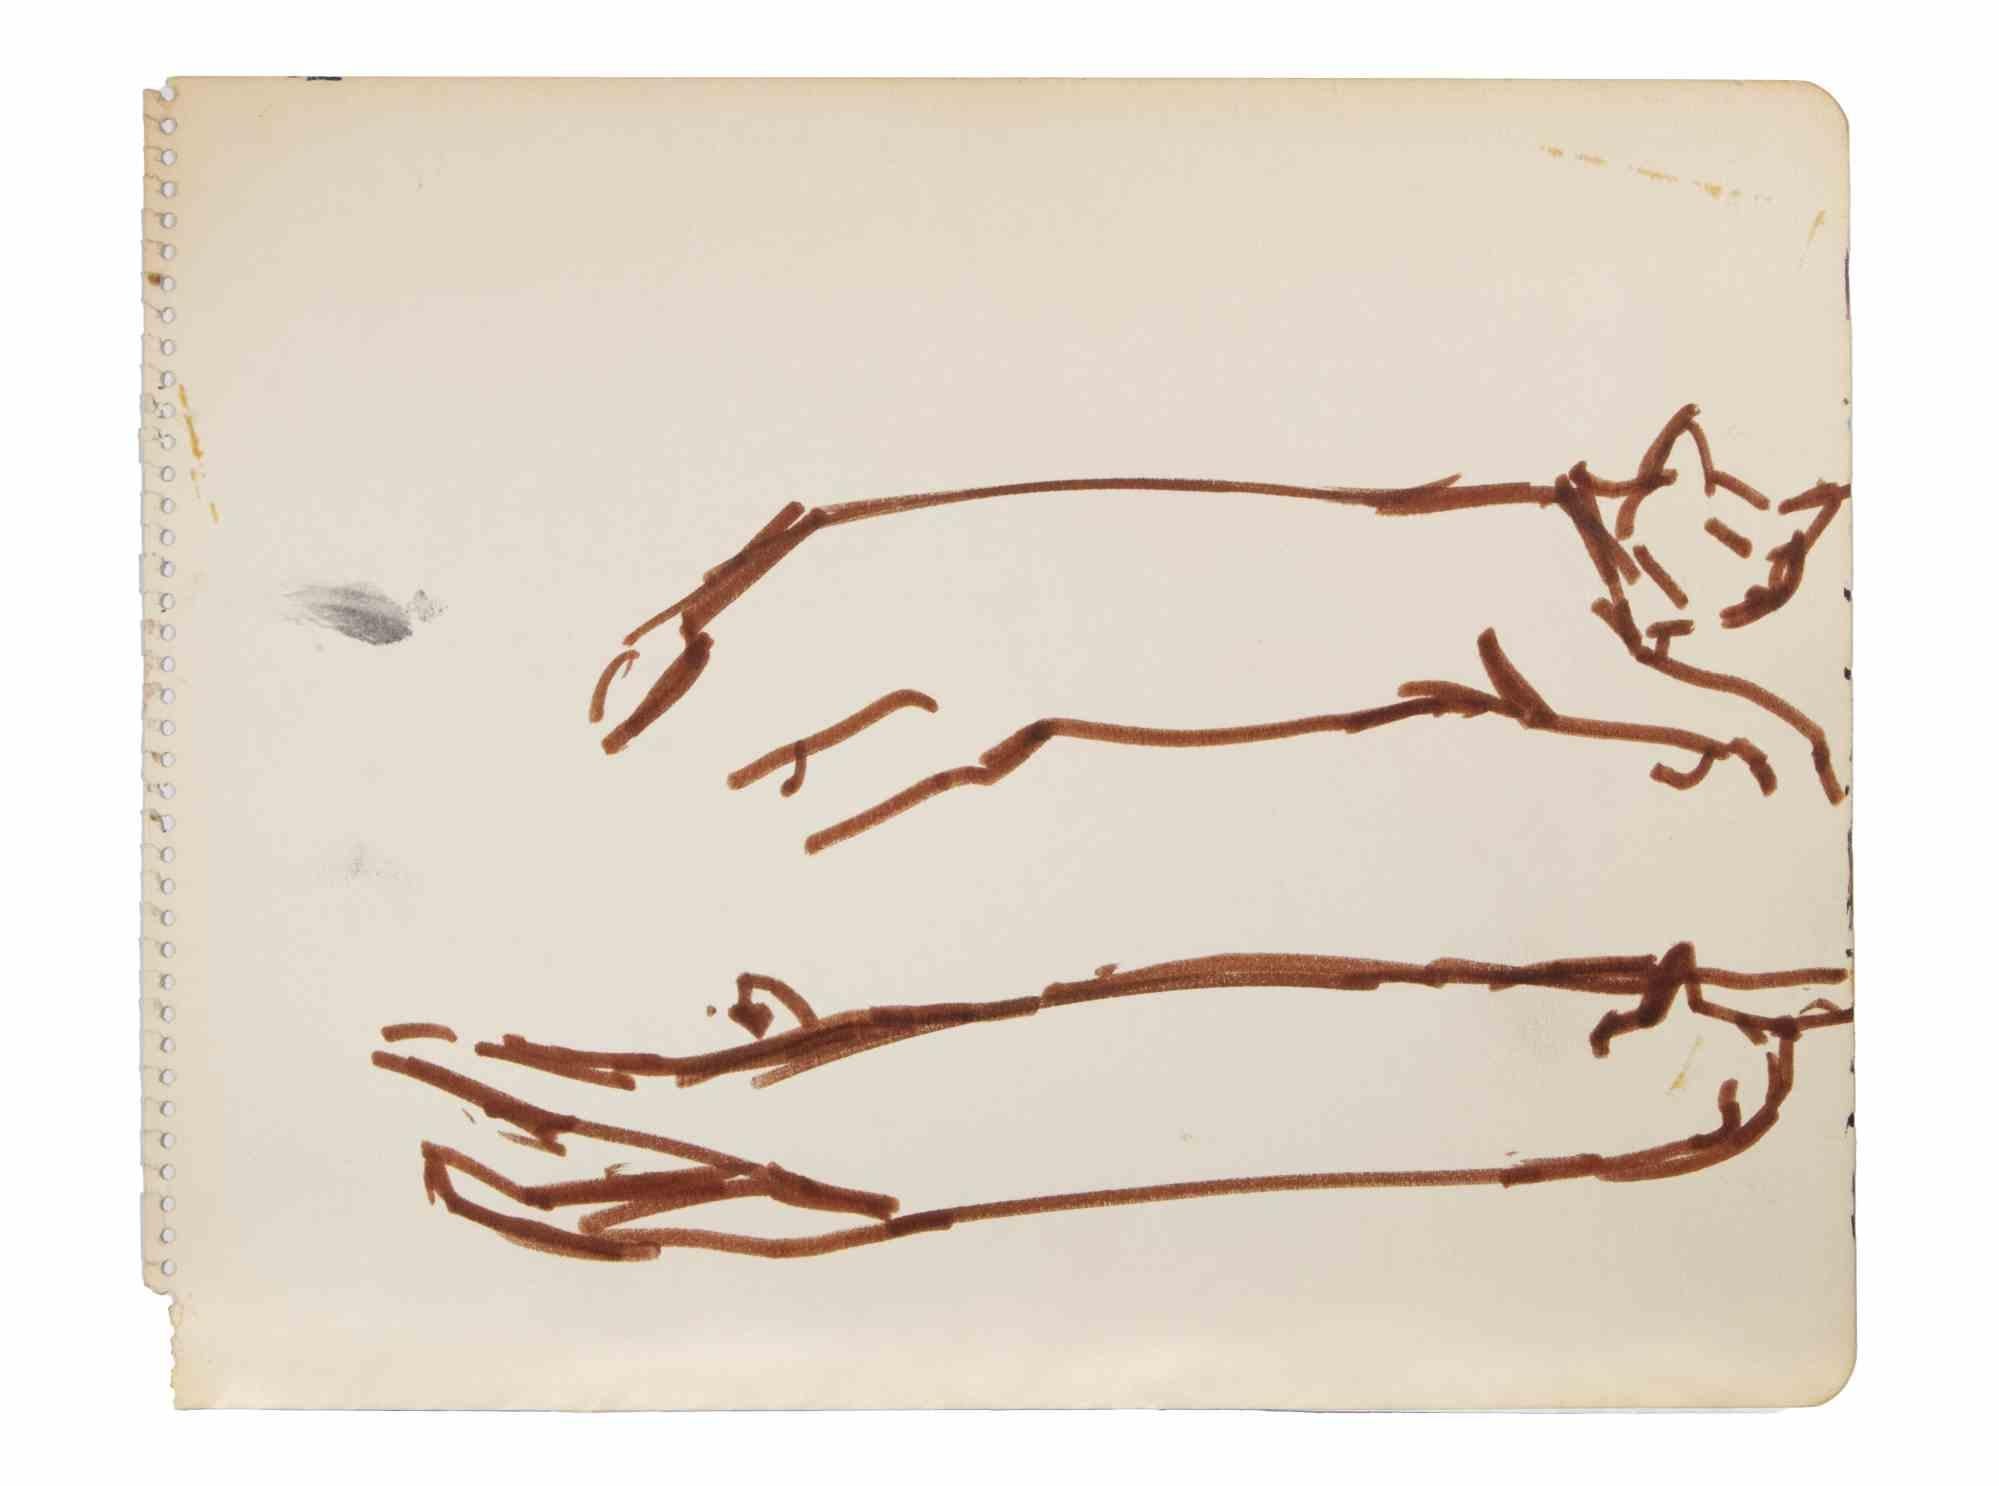 Cats is a Colour Maker Drawing realized by  Reynold Arnould  (Le Havre 1919 - Parigi 1980).

Good condition on a sheet of notebook.

No Signature.

Reynold Arnould was born in Le Havre, France in 1919. He studied at l'École des Beaux-Arts de Le